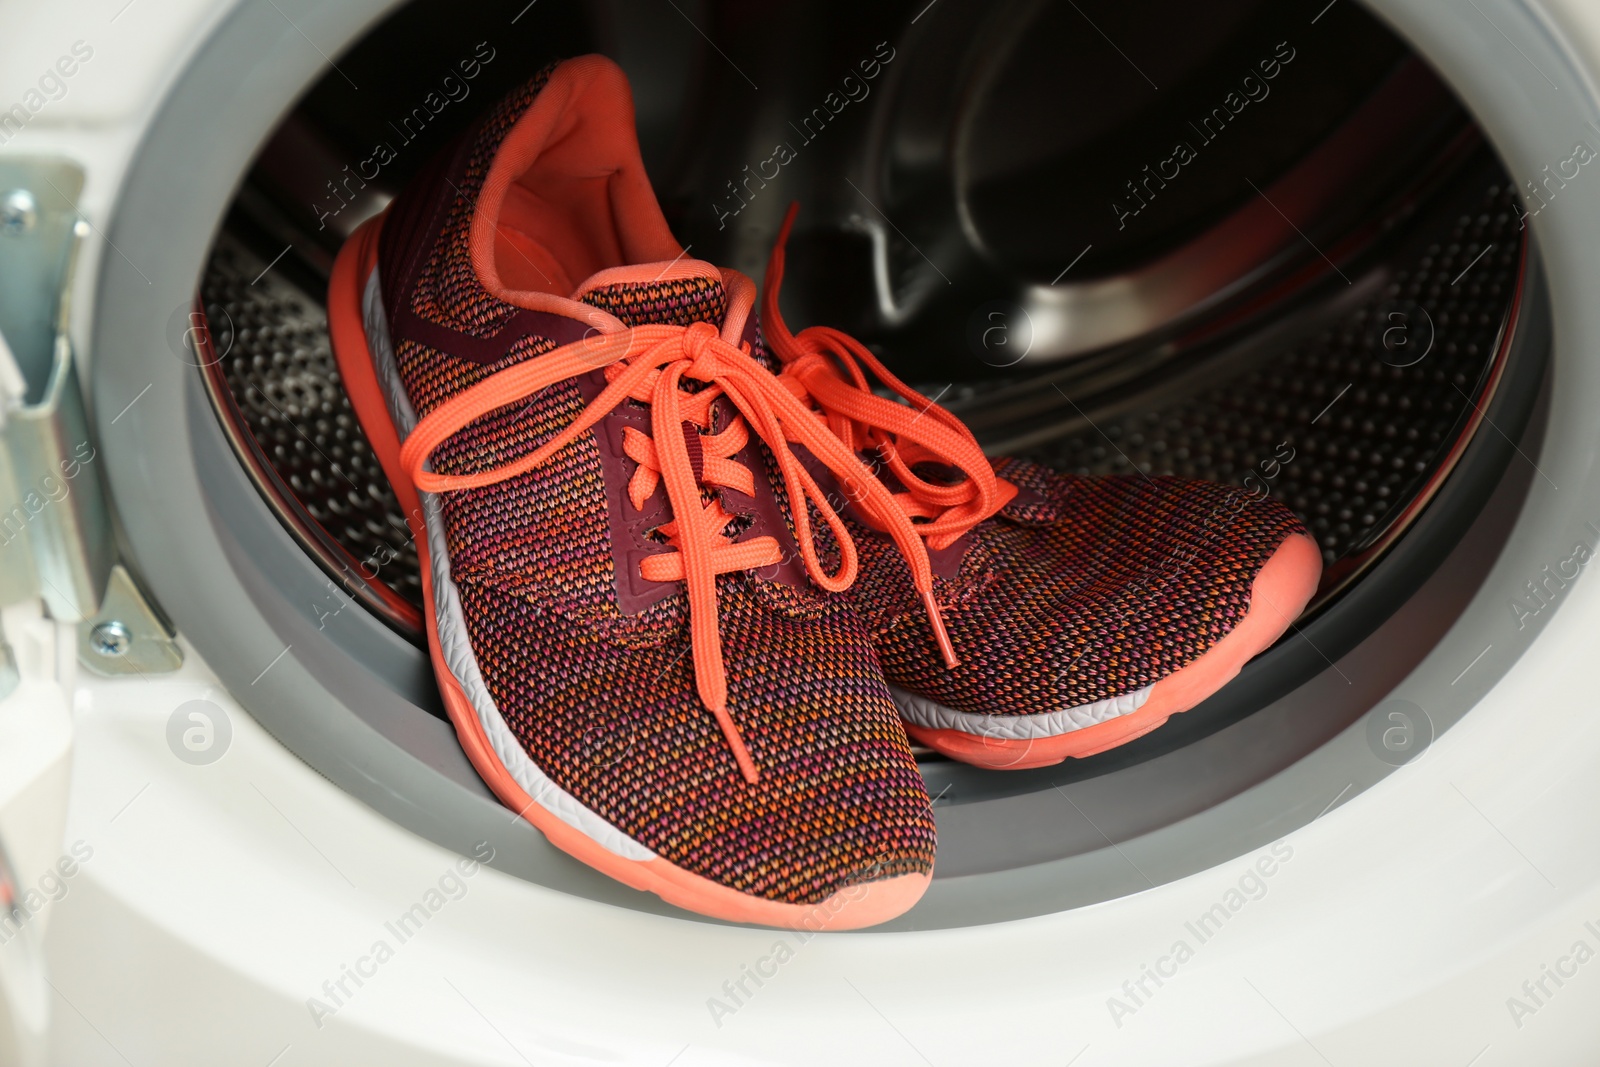 Photo of Clean sports shoes in washing machine drum, closeup